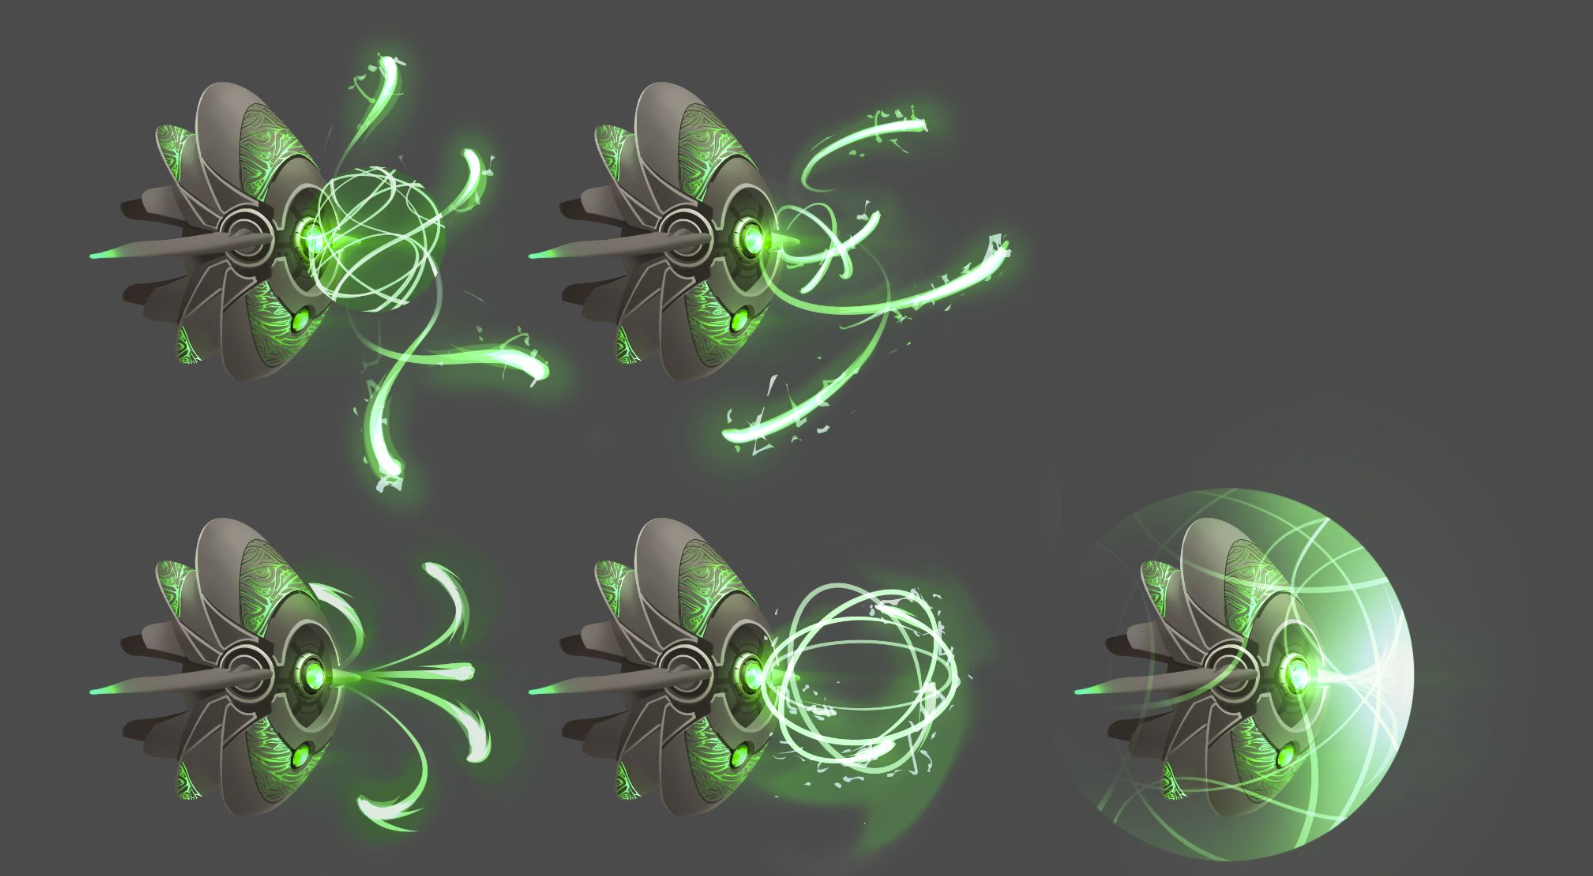 Concepts of potential VFX for the heal drone.